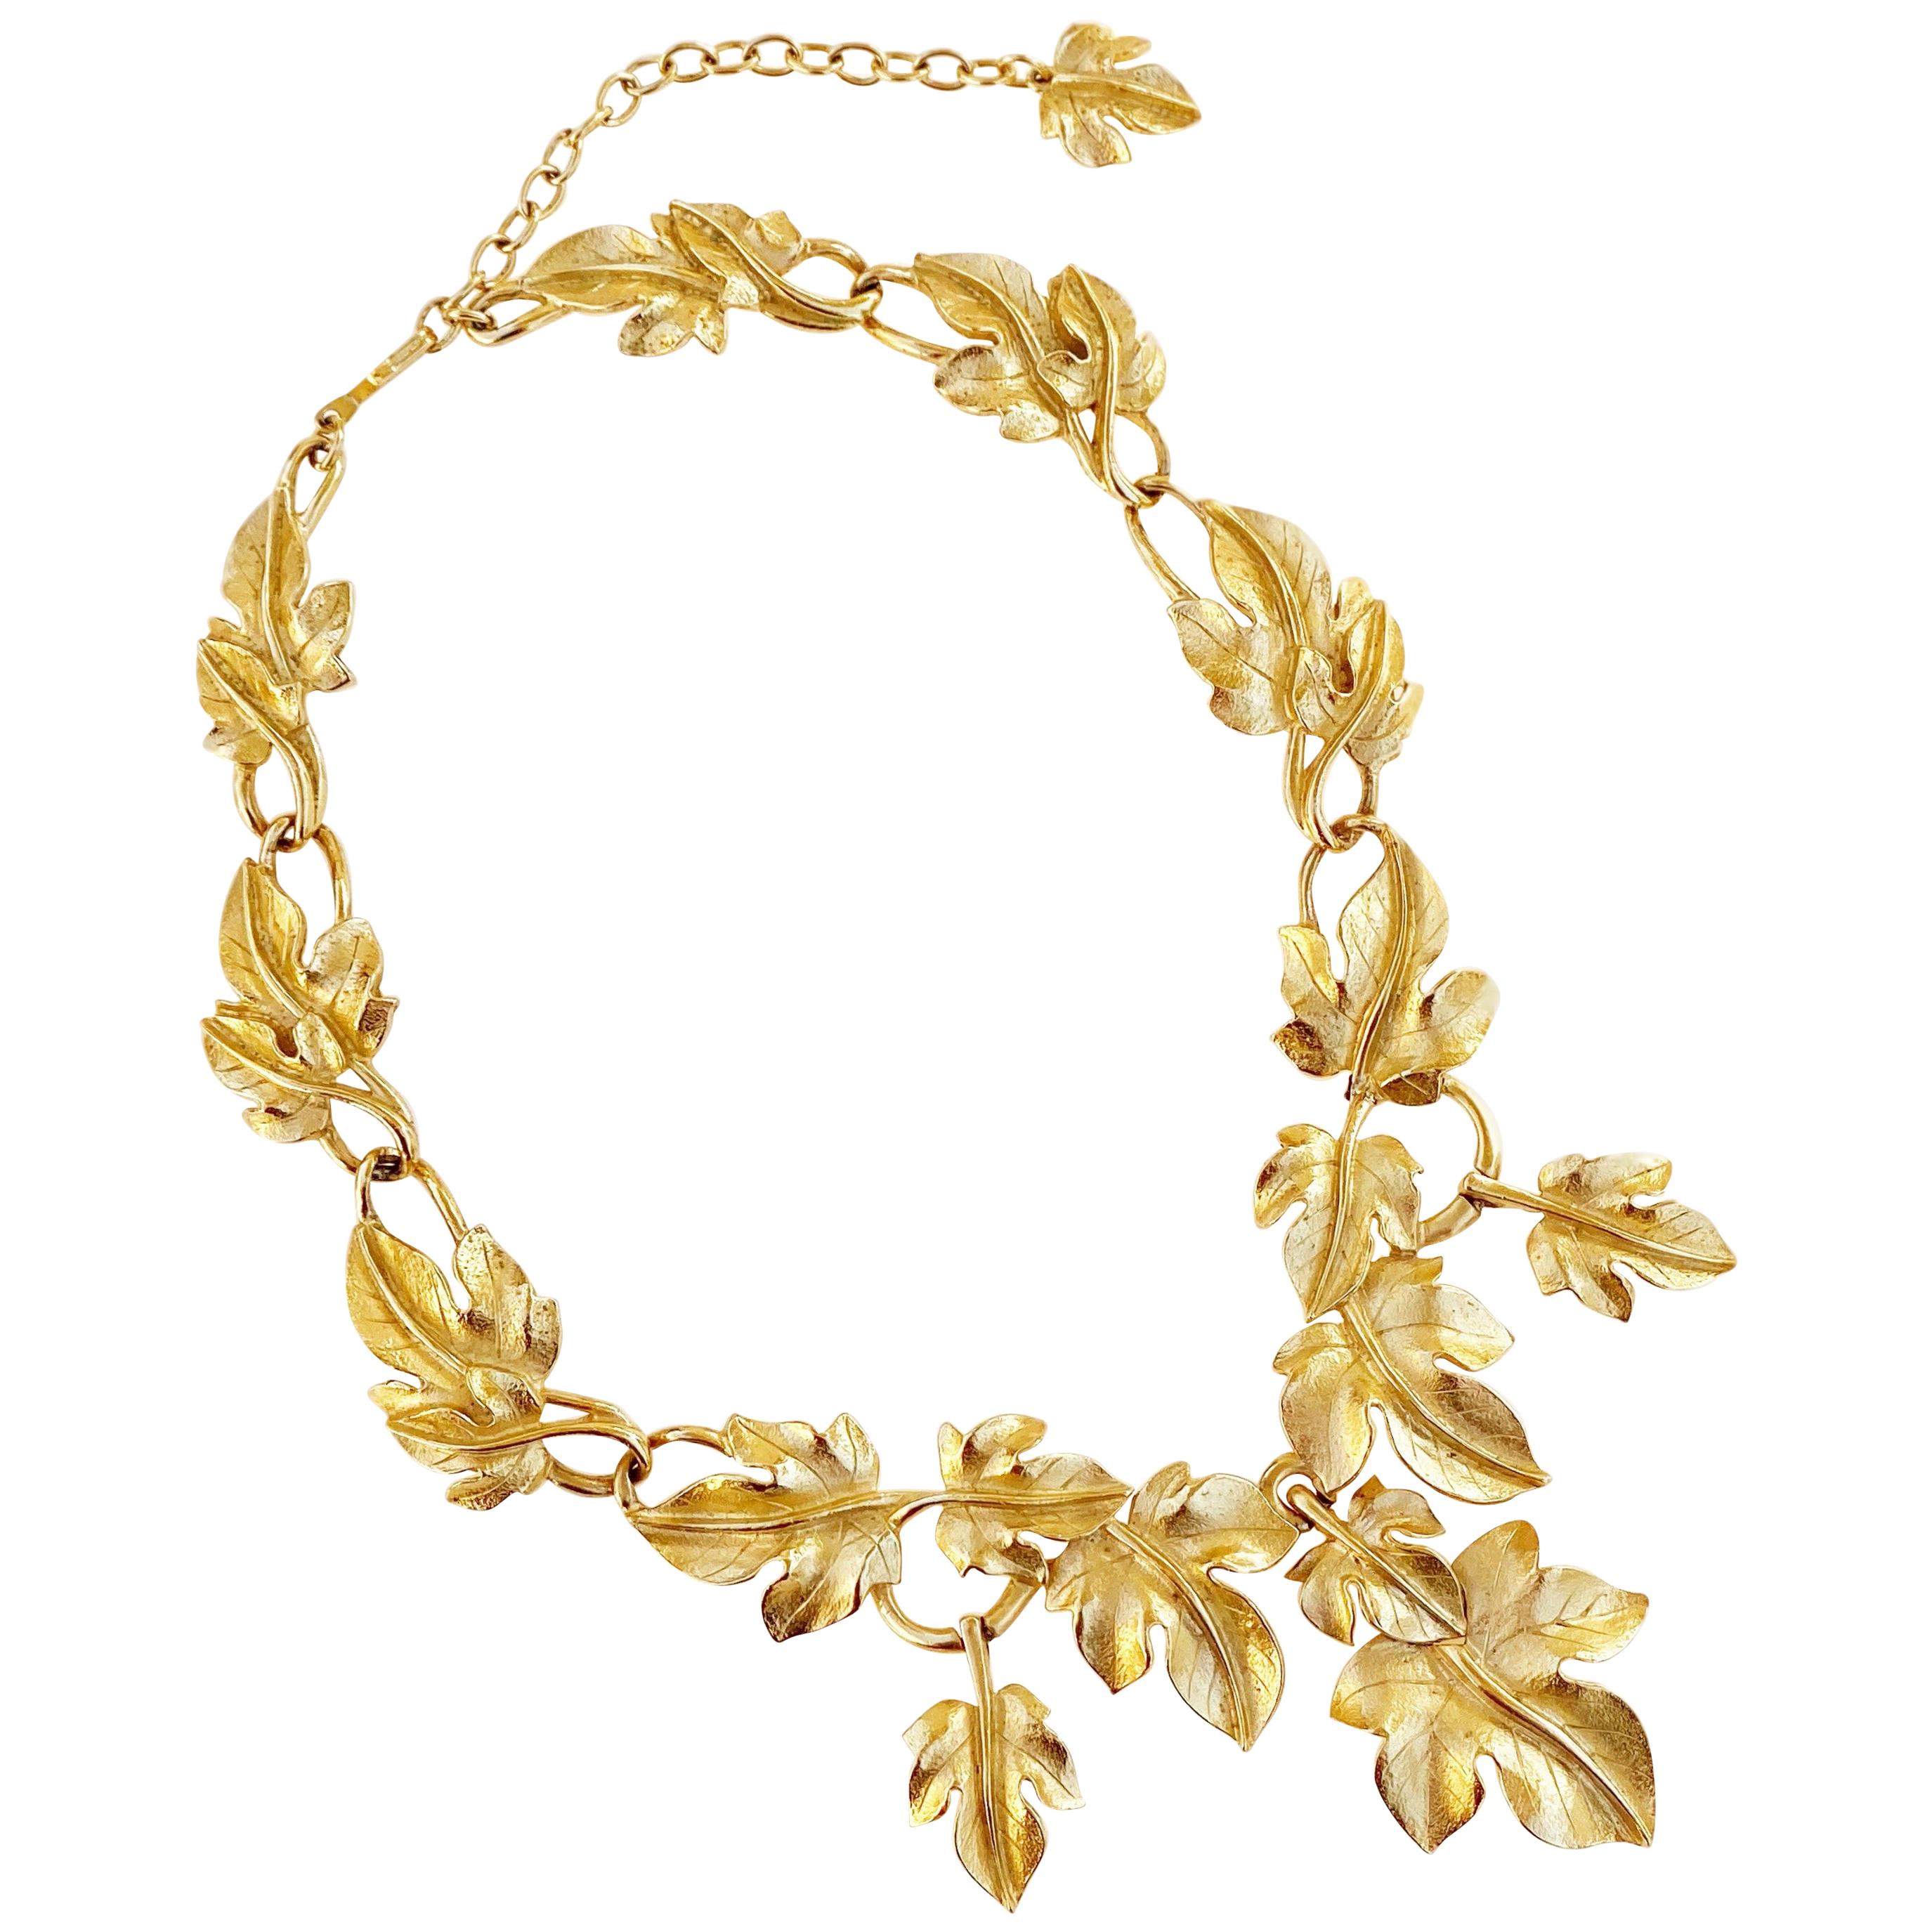 1970s Gilded Leaves Statement Choker Necklace By Kunio Matsumoto For Trifari